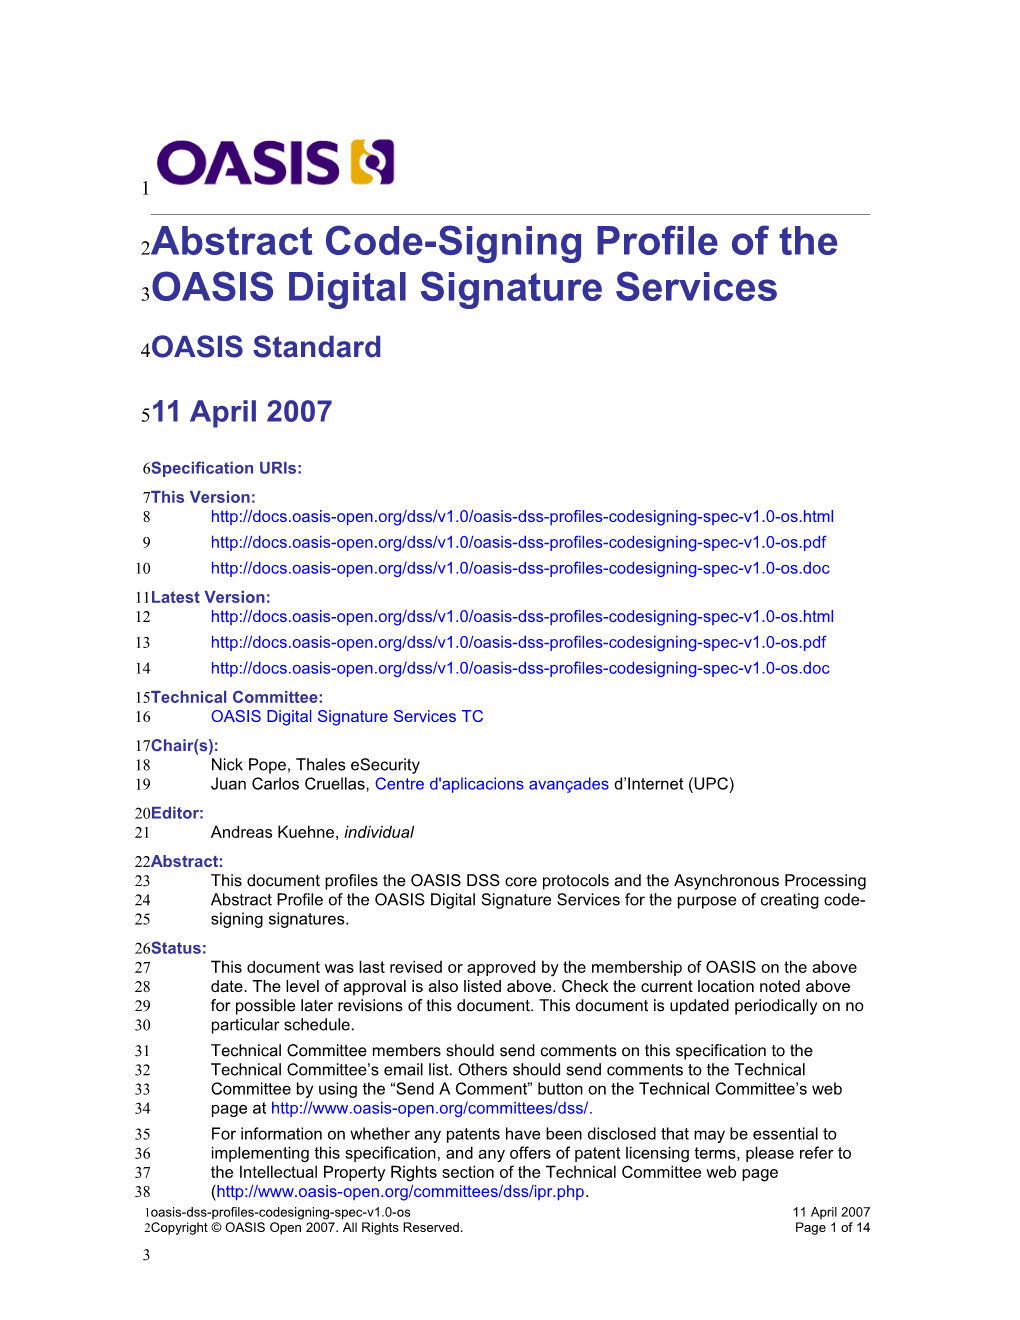 Abstract Codesigning Profile of the OASIS Digital Signature Services